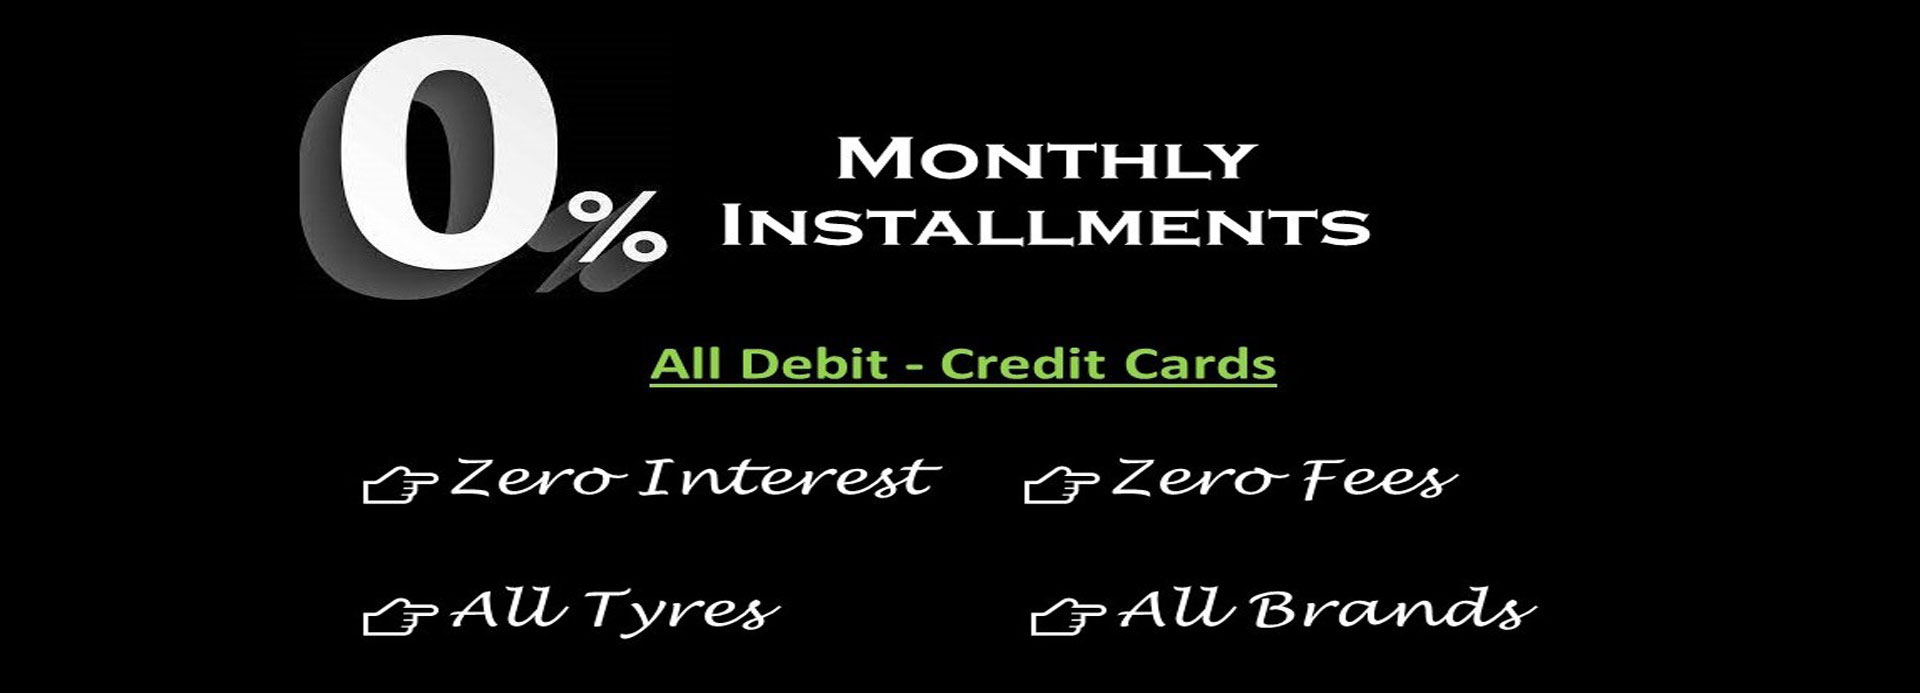 Monthly Installments Plan